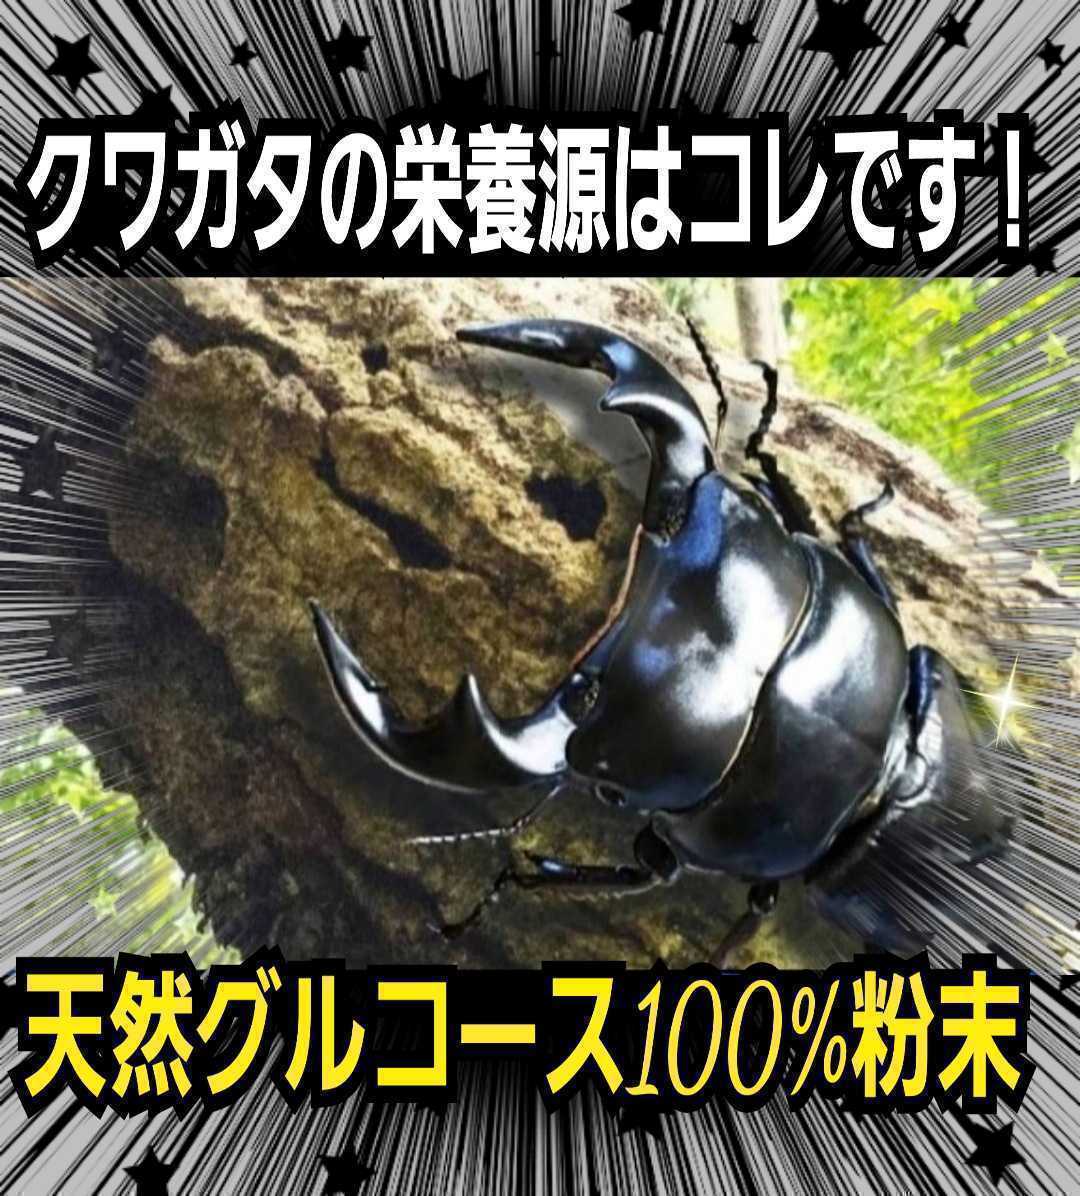  rhinoceros beetle * stag beetle. nutrition source is kore.!gru course size up, production egg number up, length . exceptionally effective! mat .. thread * jelly .... only!